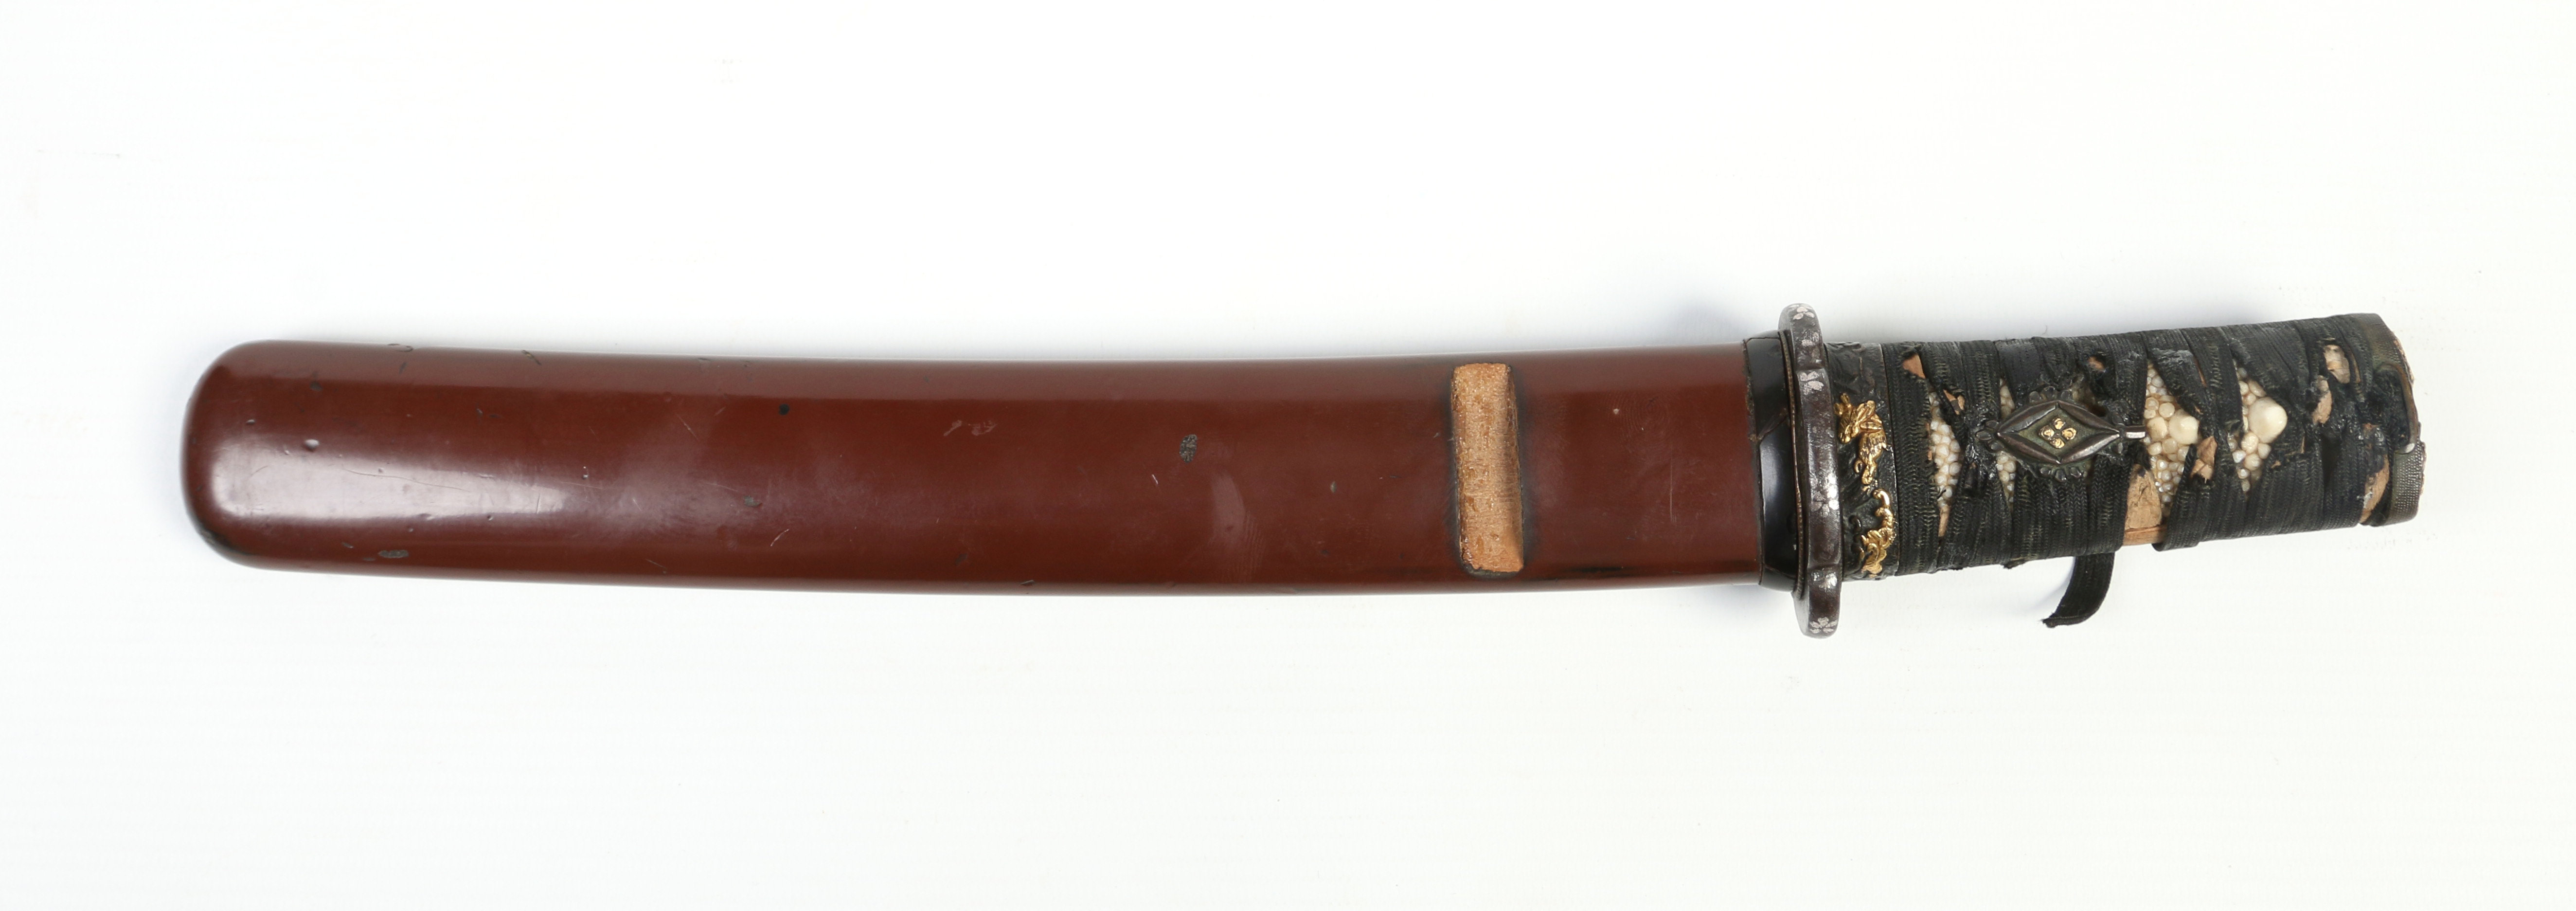 A Japanese Edo period tanto dagger in lacquered sheath. - Image 12 of 12